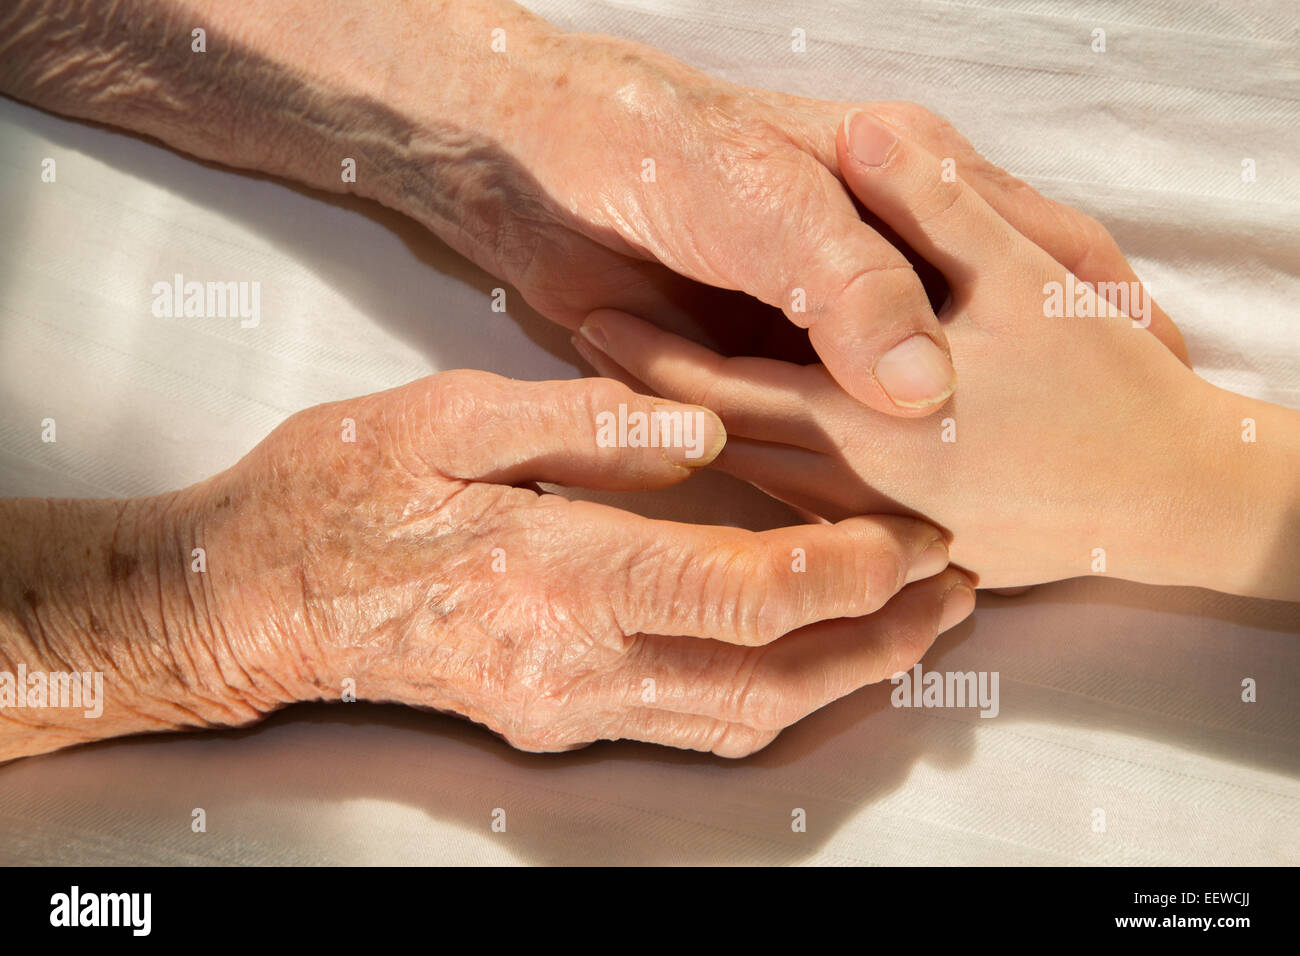 hands of grandmother and grandchild in the bed Stock Photo